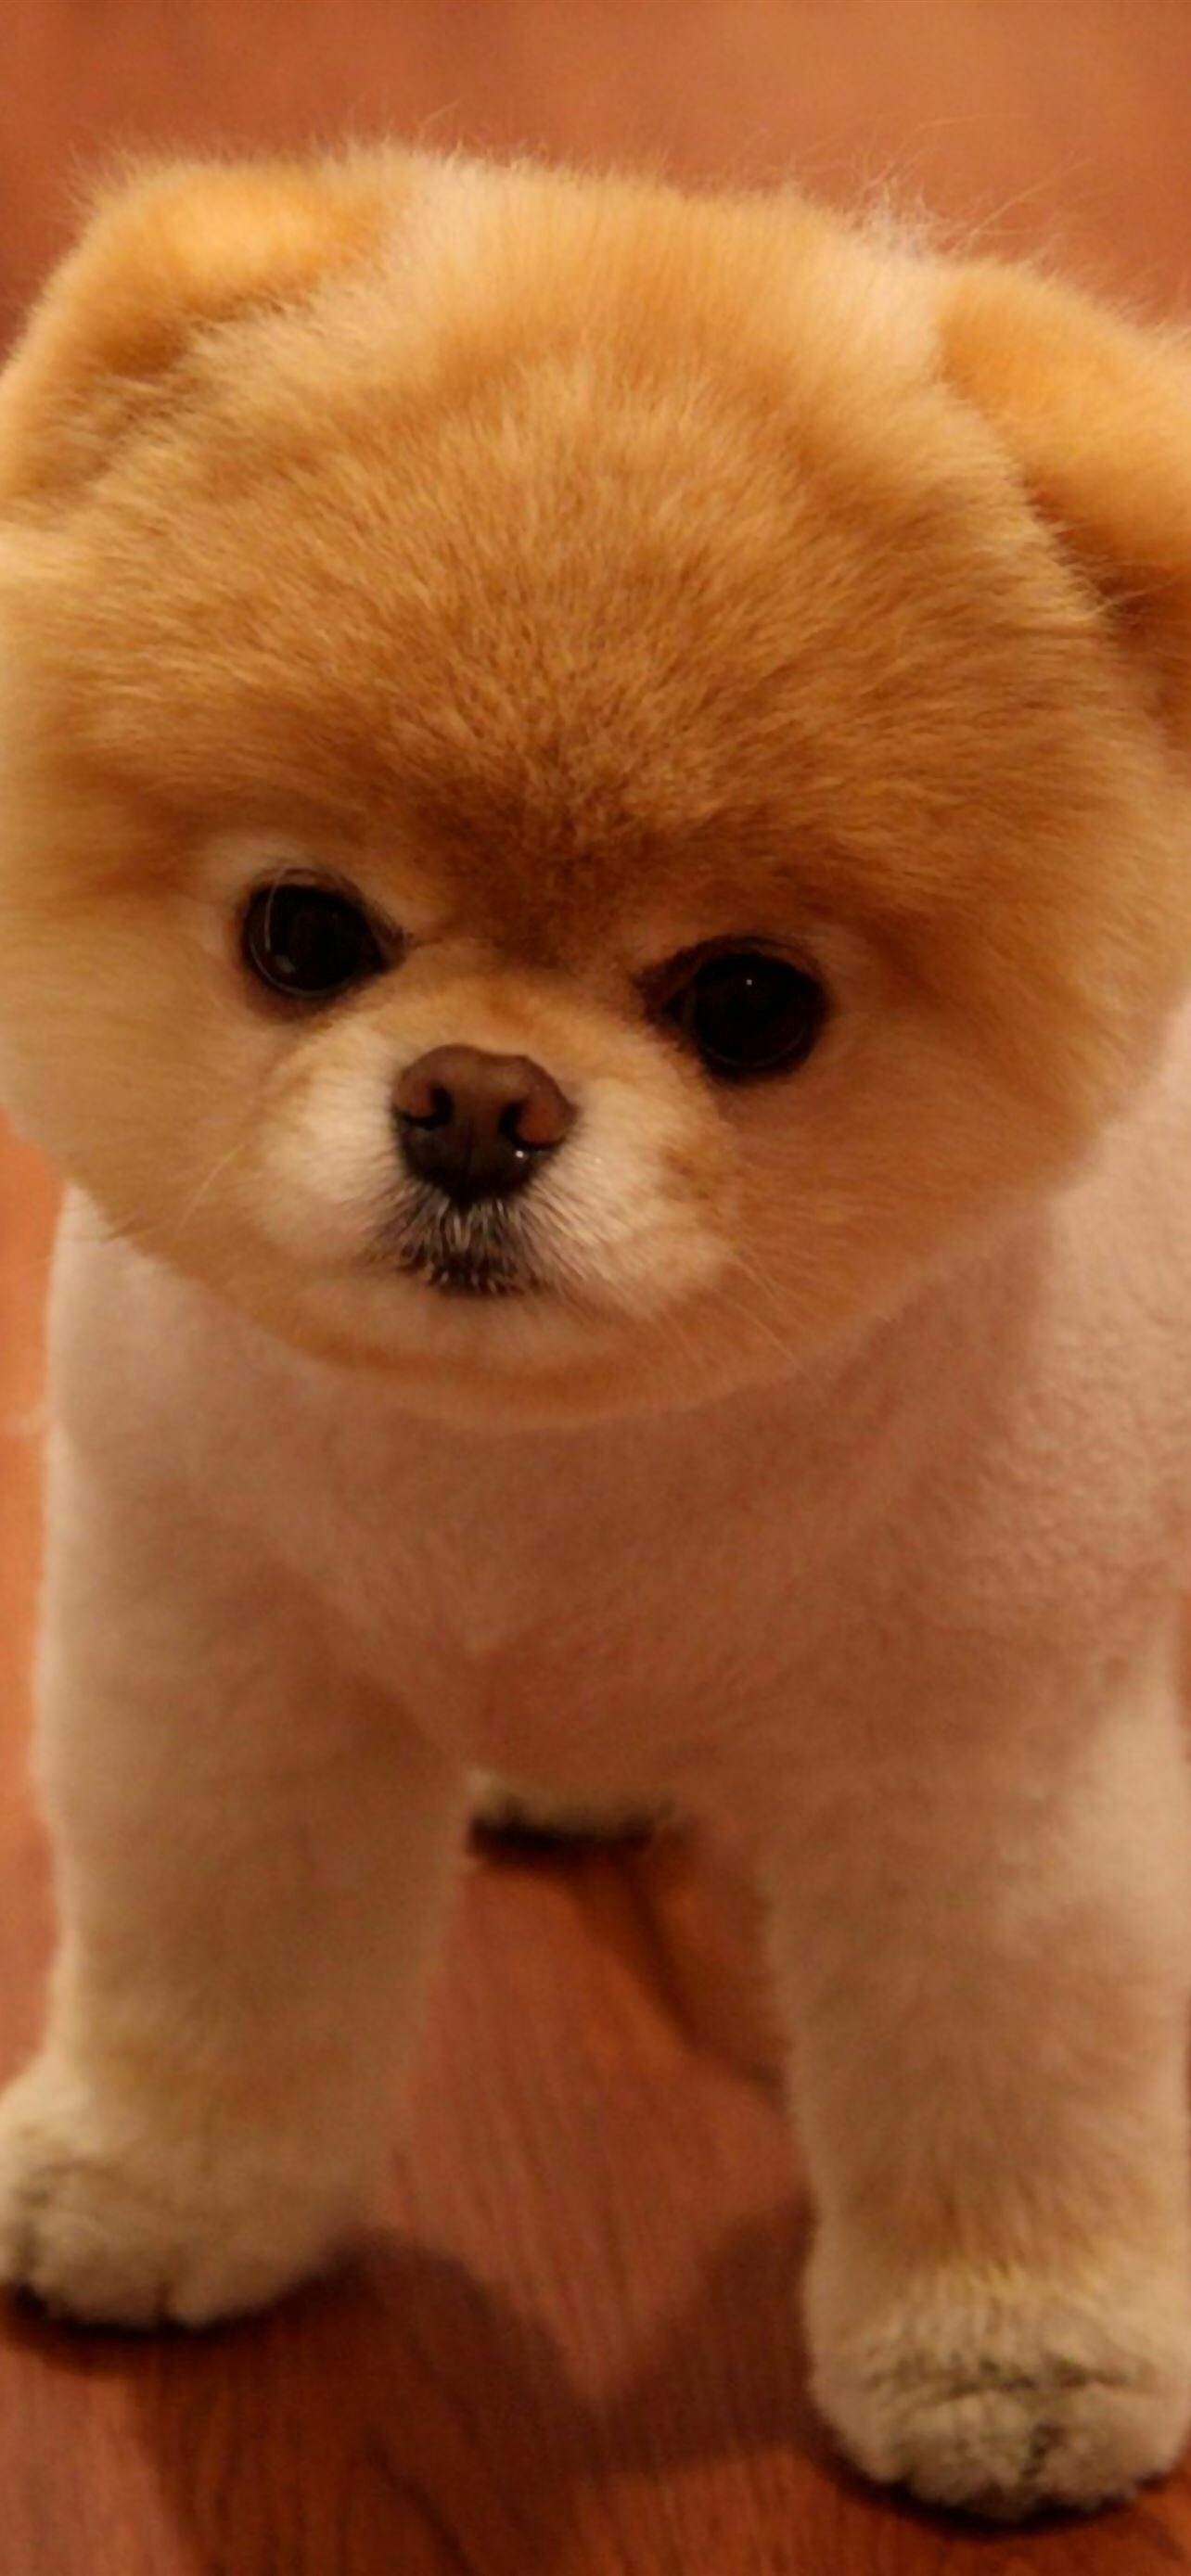 Pomeranian: Cute dog, The breed is intelligent and respond well to training. 1290x2780 HD Wallpaper.